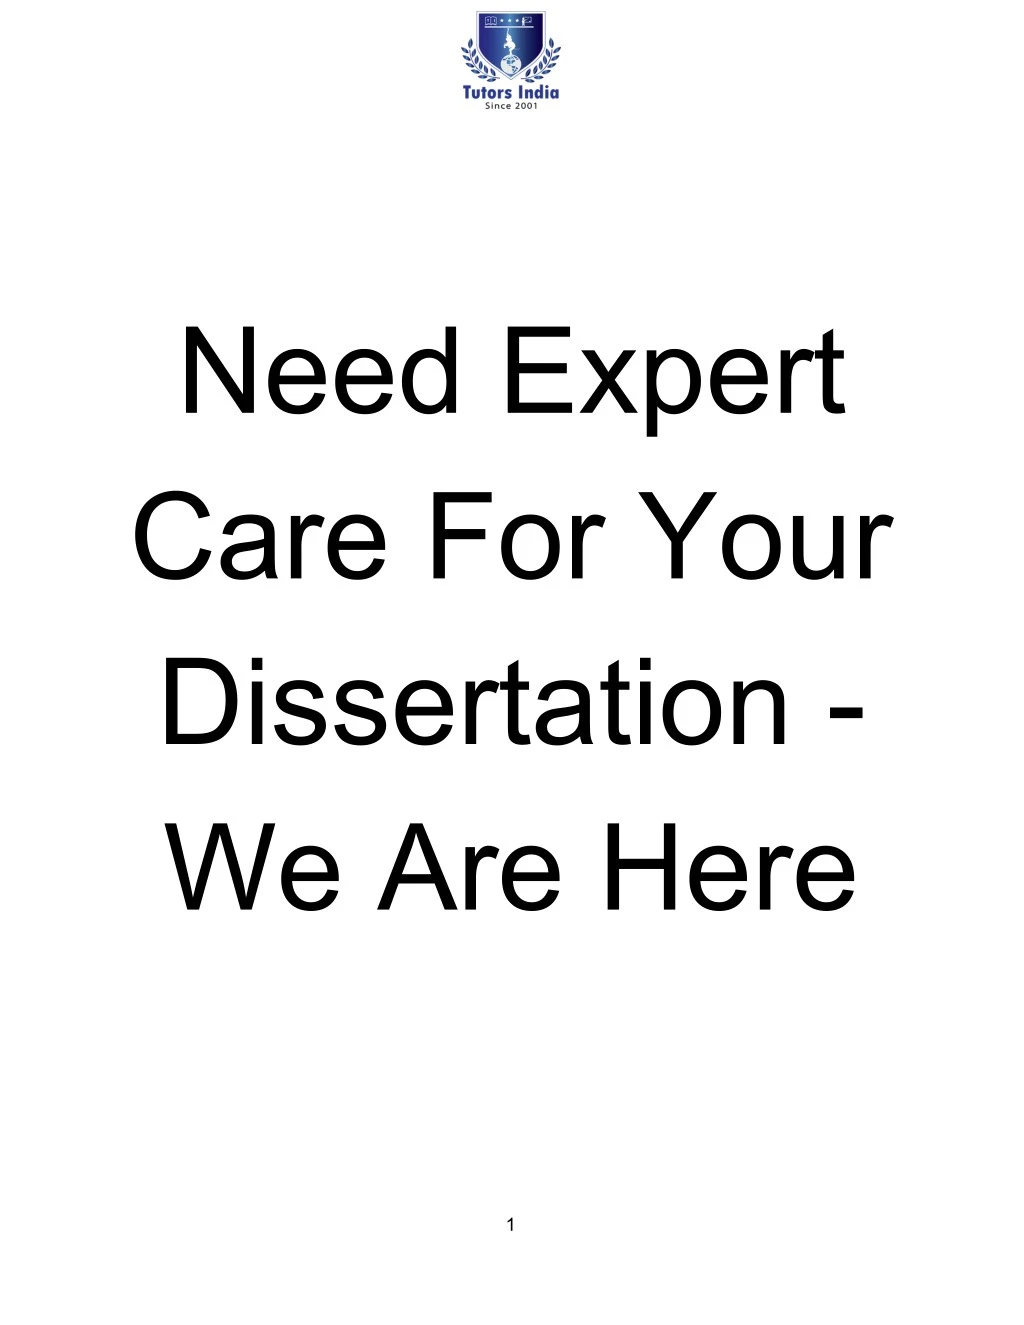 need expert care for your dissertation we are here